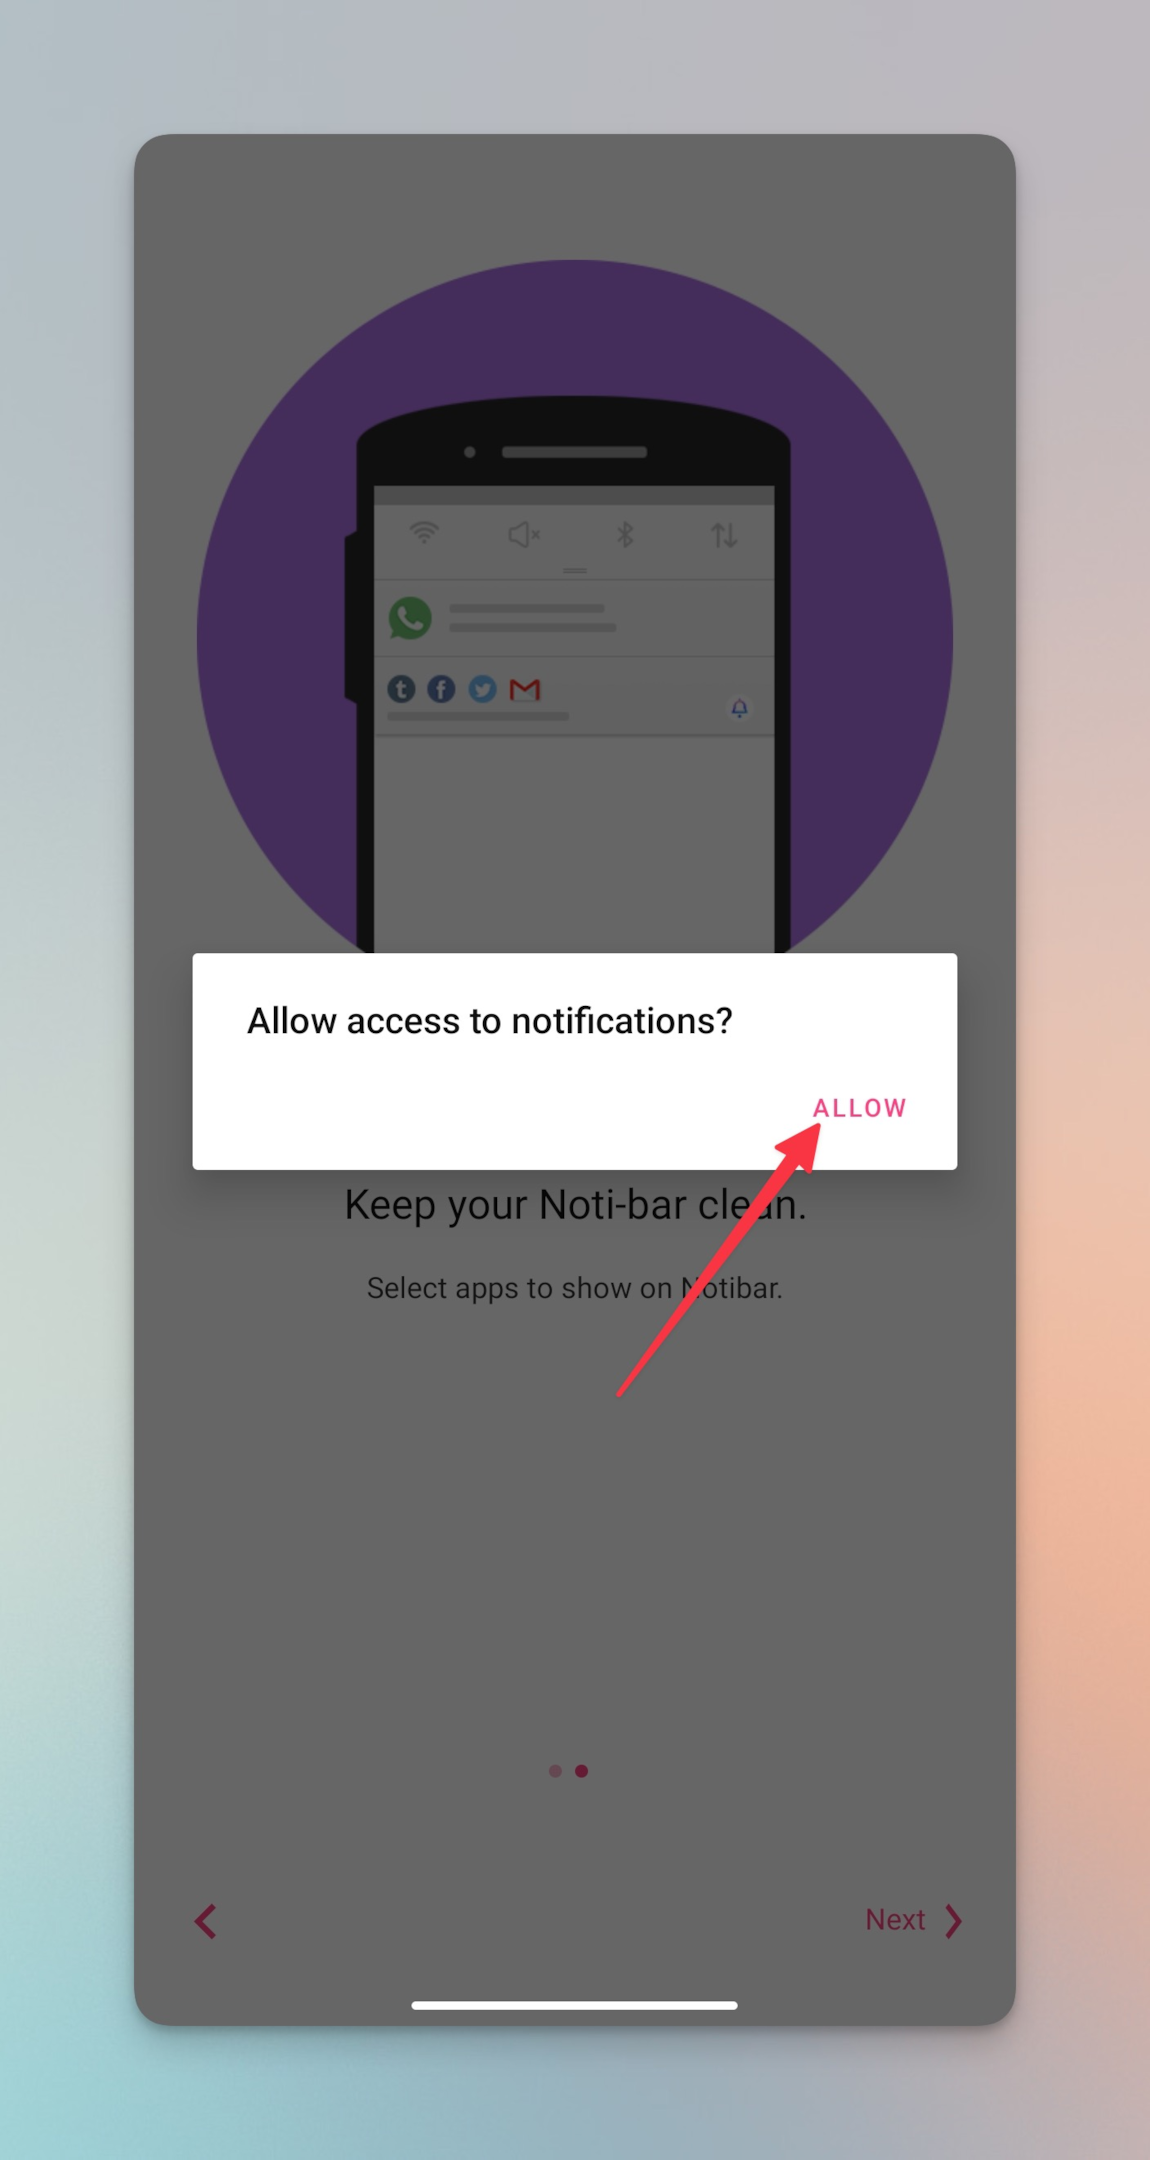 Remote.tools shows a pop up to allow notification access & view unsent messages